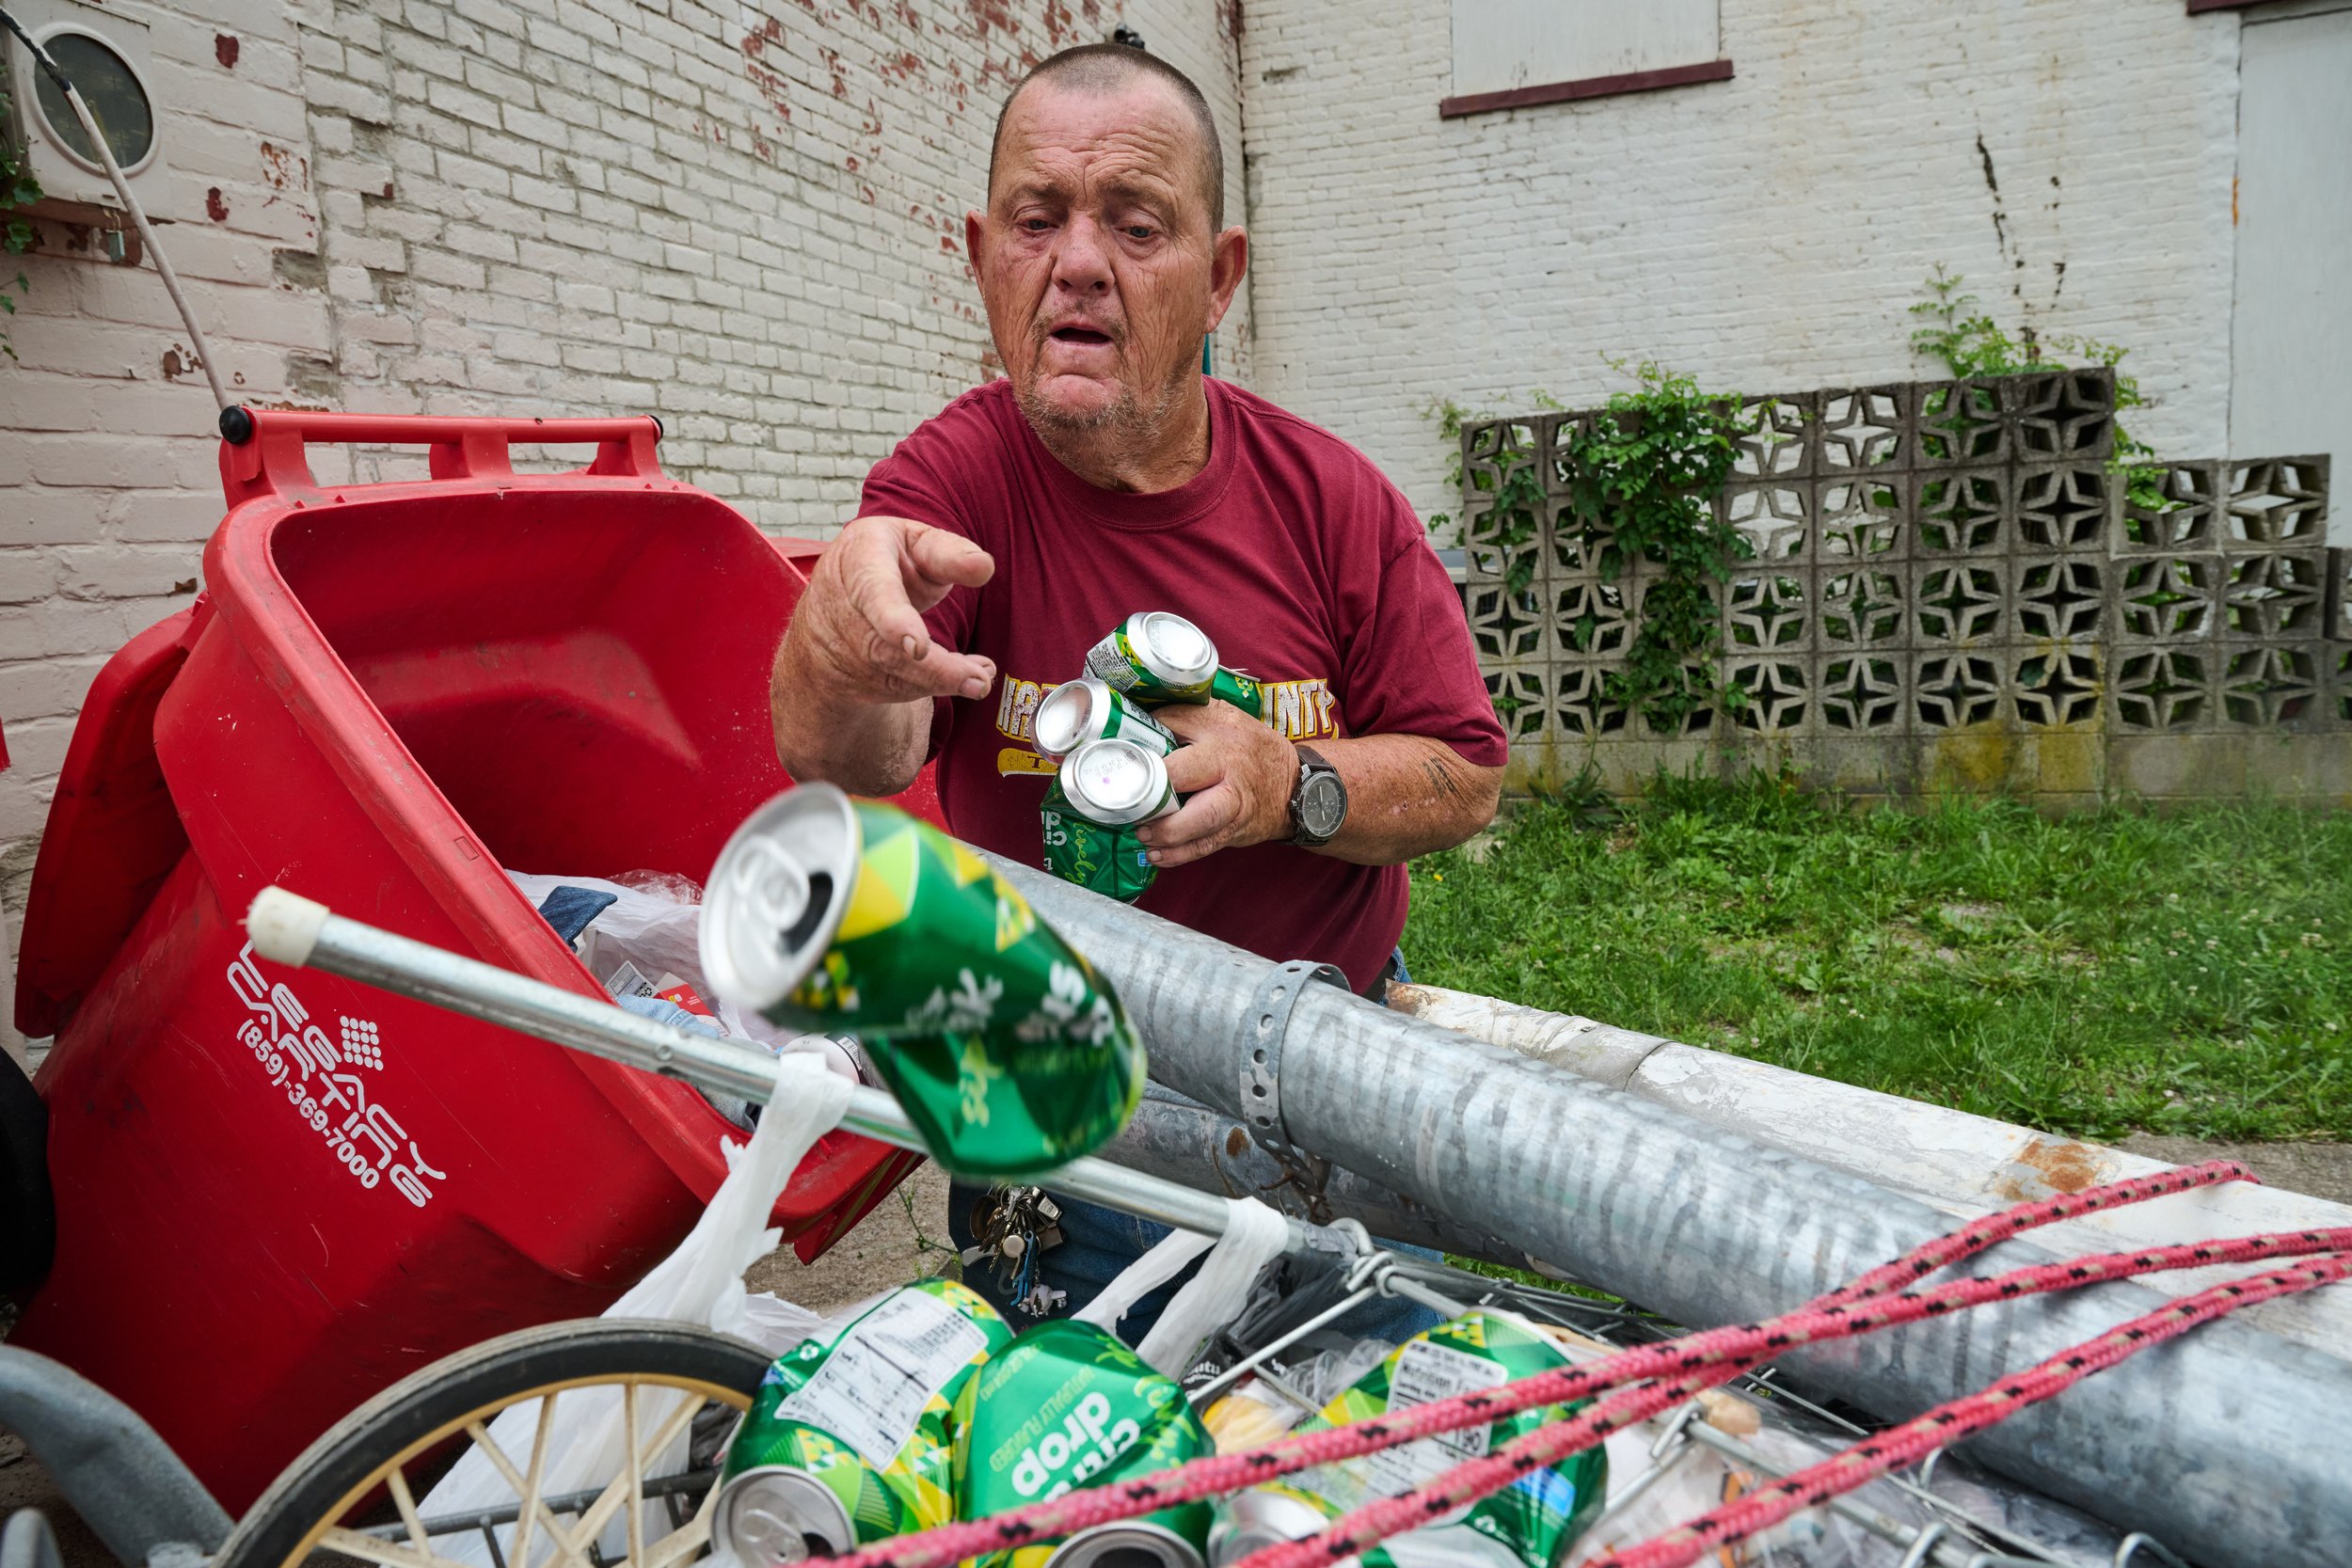  7/8/23—Cynthiana, Kentucky — Fryman tosses a can from a residential garbage can into his shopping cart. Fryman seeks permission from homeowners to look through their garbage cans for trash he can recycle, as there is no recycling infrastructure thro